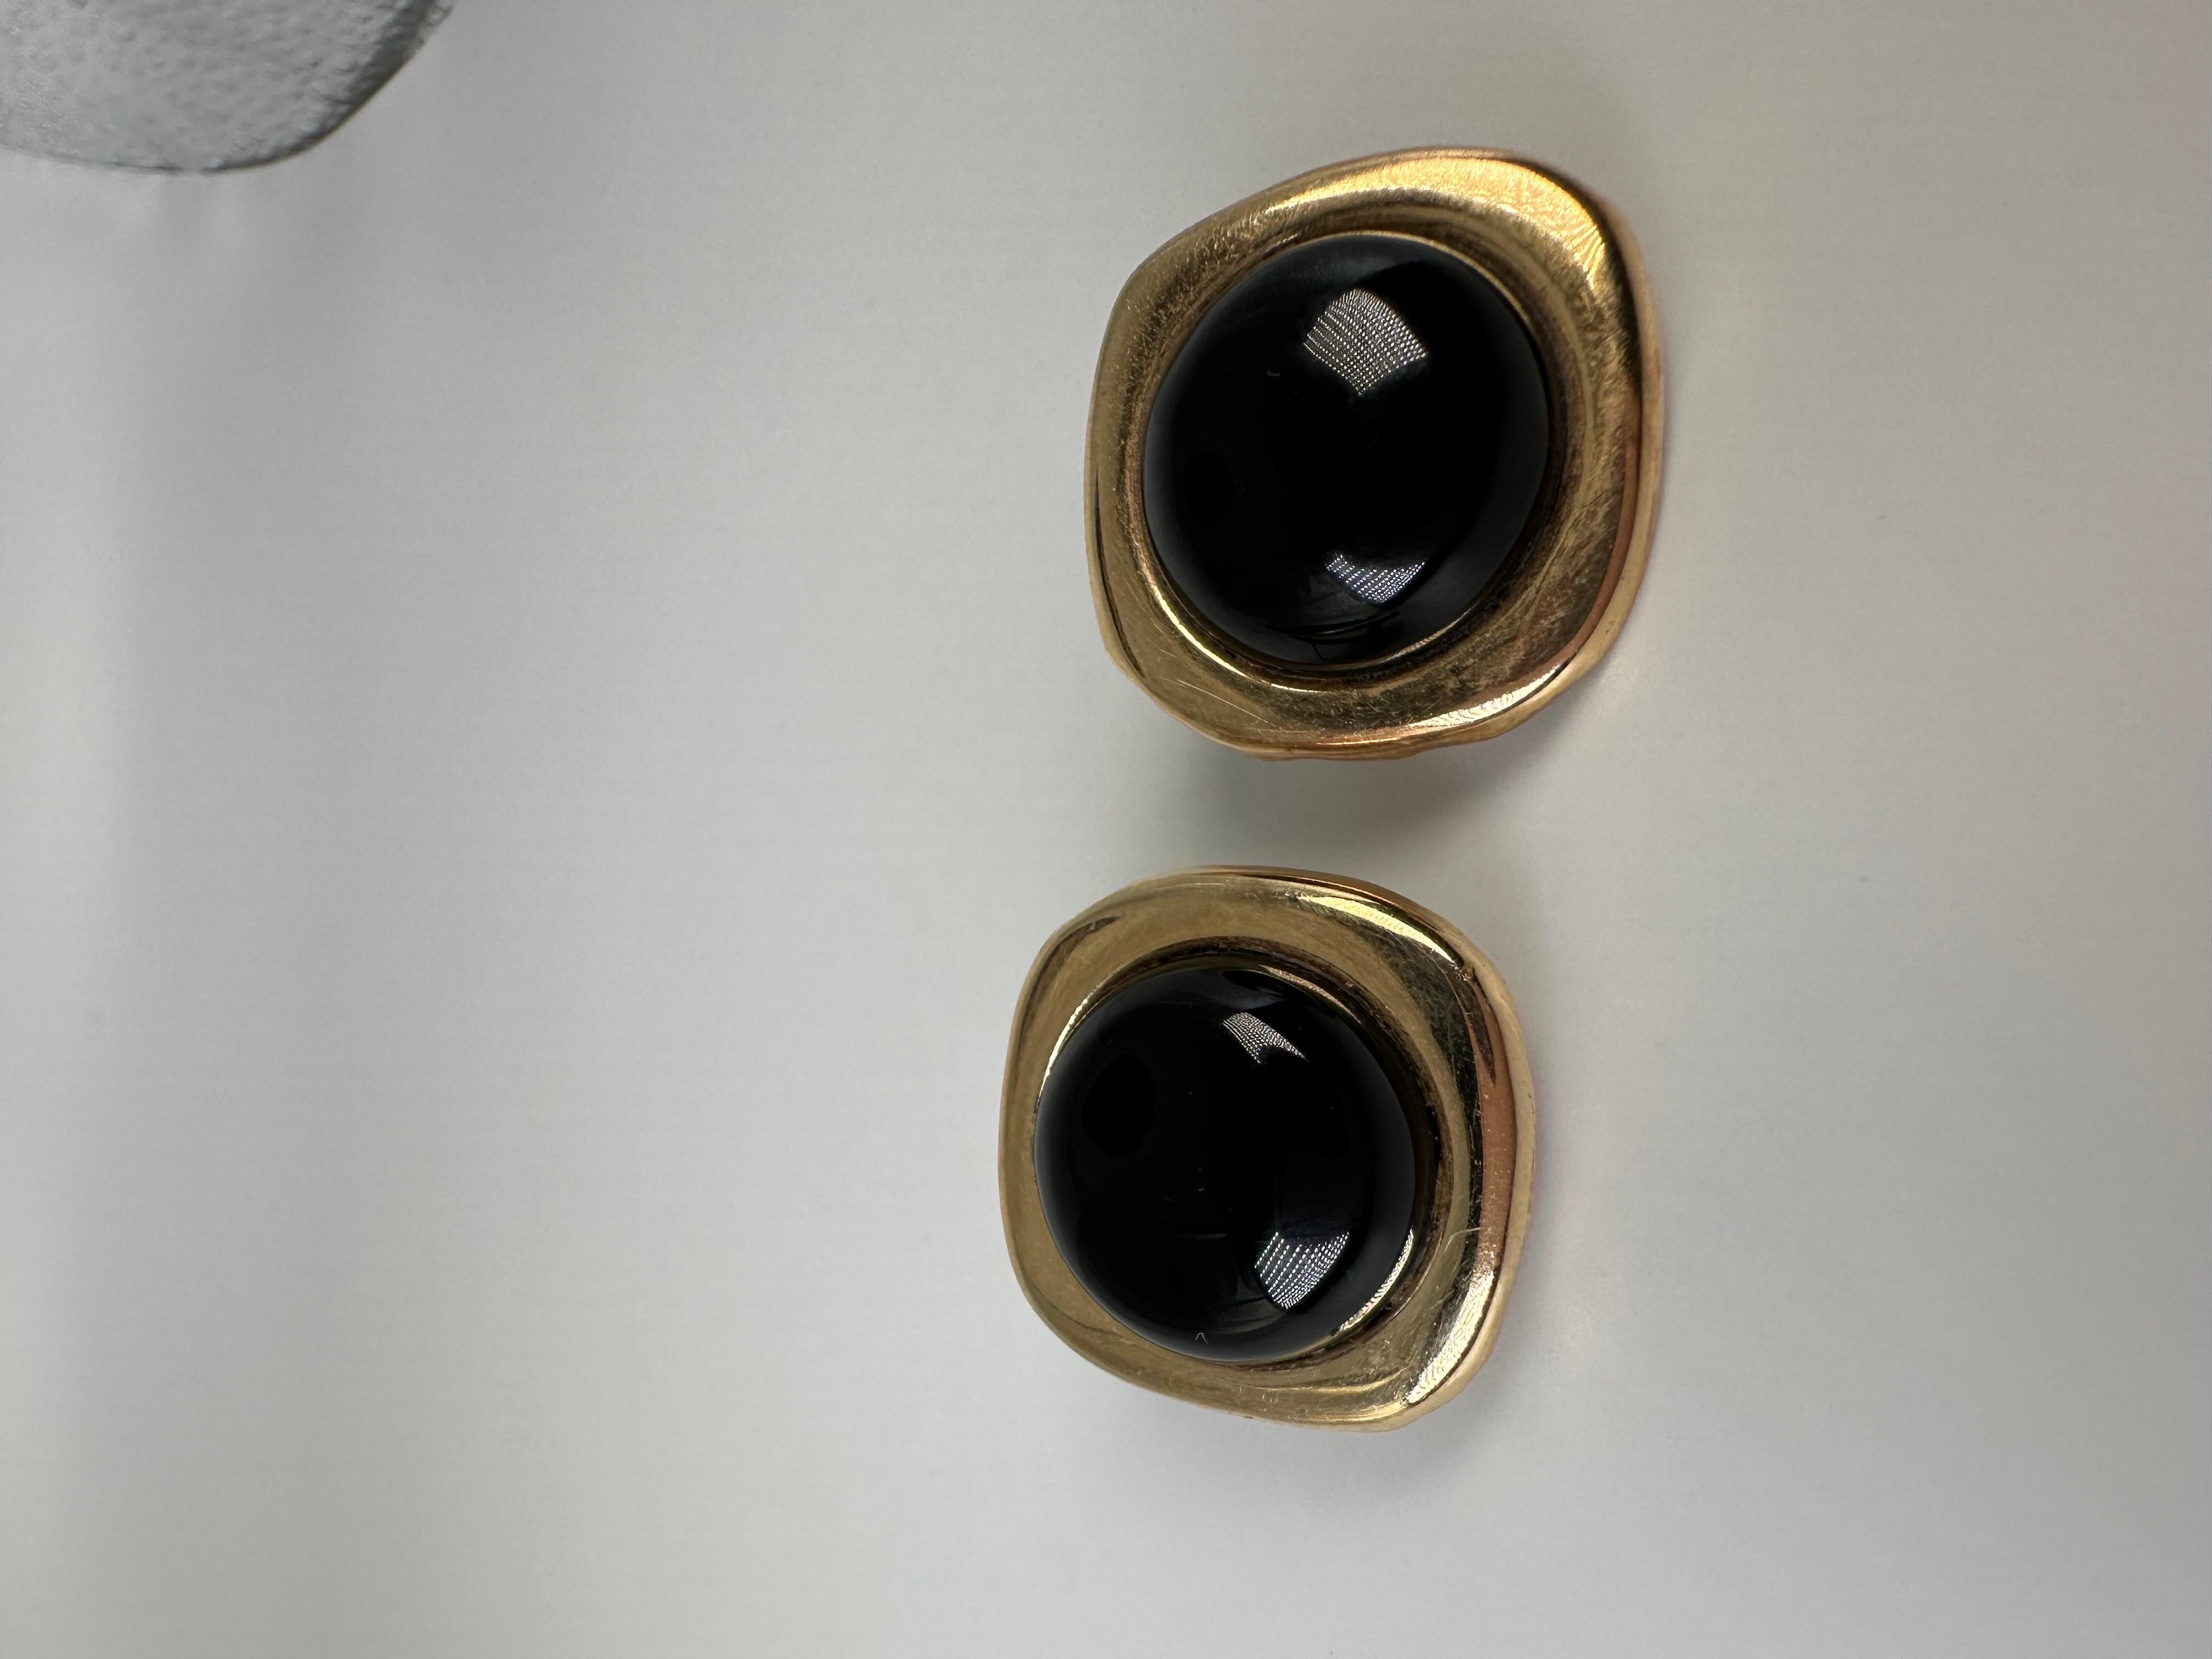 Onyx gold earrings large earrings with omega closure! The onyx are 18mm in diameter!

GOLD: 14KT gold
Grams:11.24
Backing: omega
Item:21000026emk

WHAT YOU GET AT STAMPAR JEWELERS:
Stampar Jewelers, located in the heart of Jupiter, Florida, is a